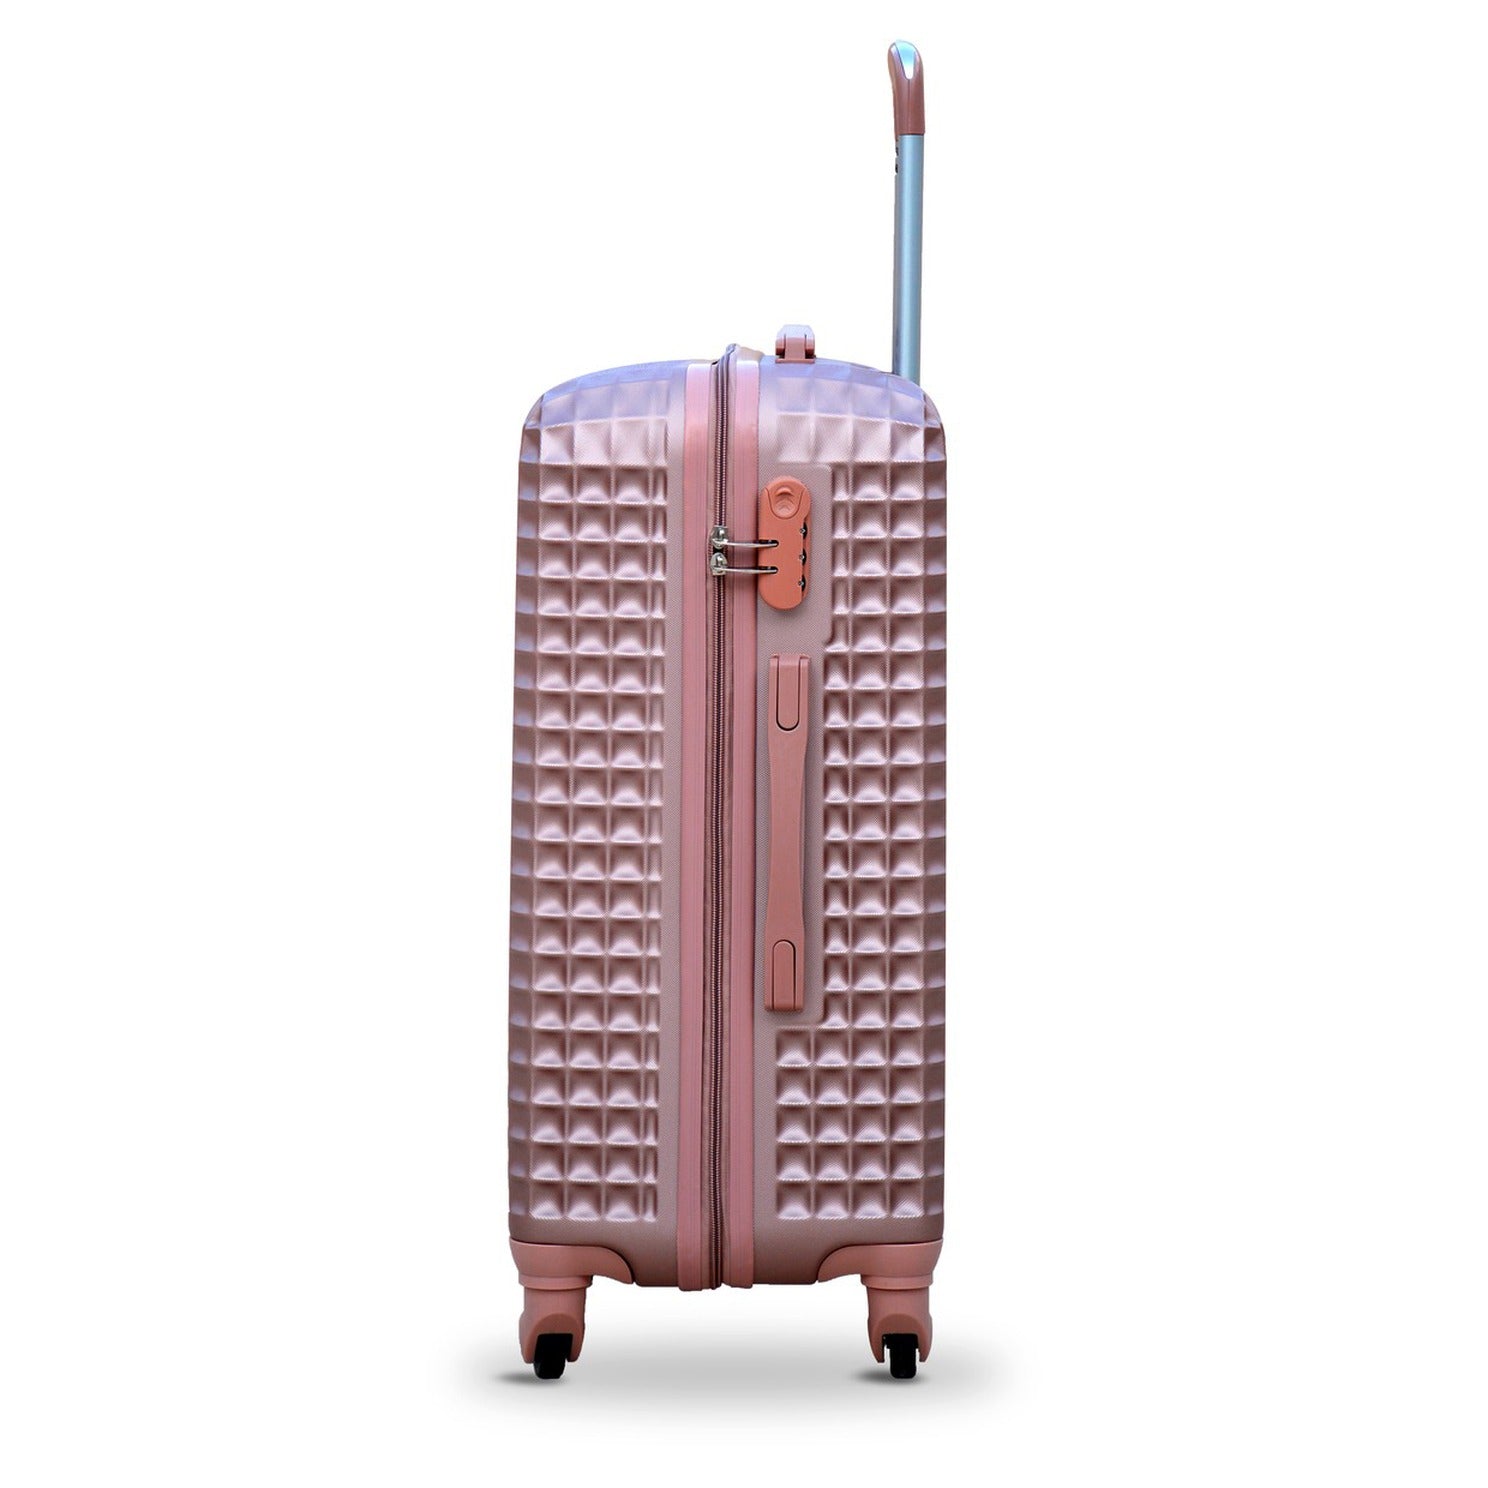 28" Rose Gold Colour Square Cut ABS Luggage Lightweight Hard Case Trolley Bag | 2 Year Warranty